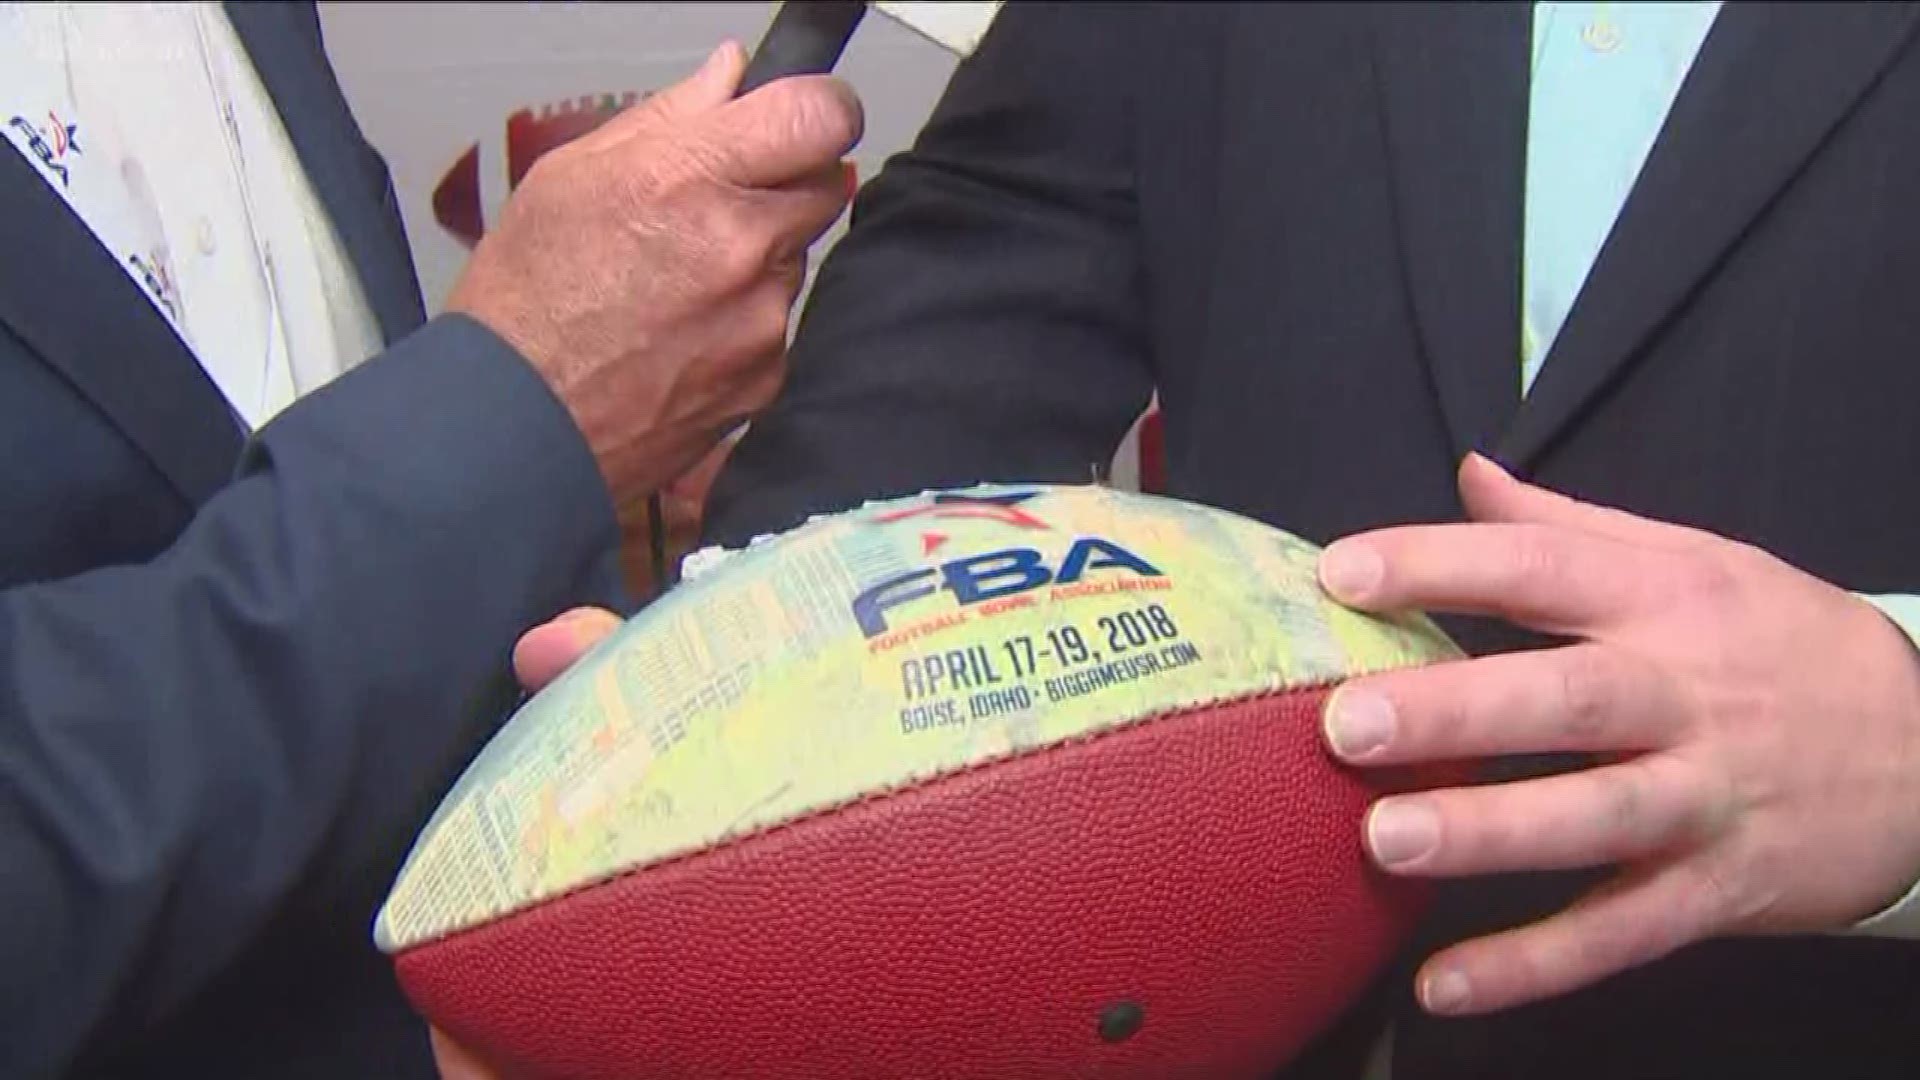 The College Football Bowl Association is in Boise this week for its annual meeting.